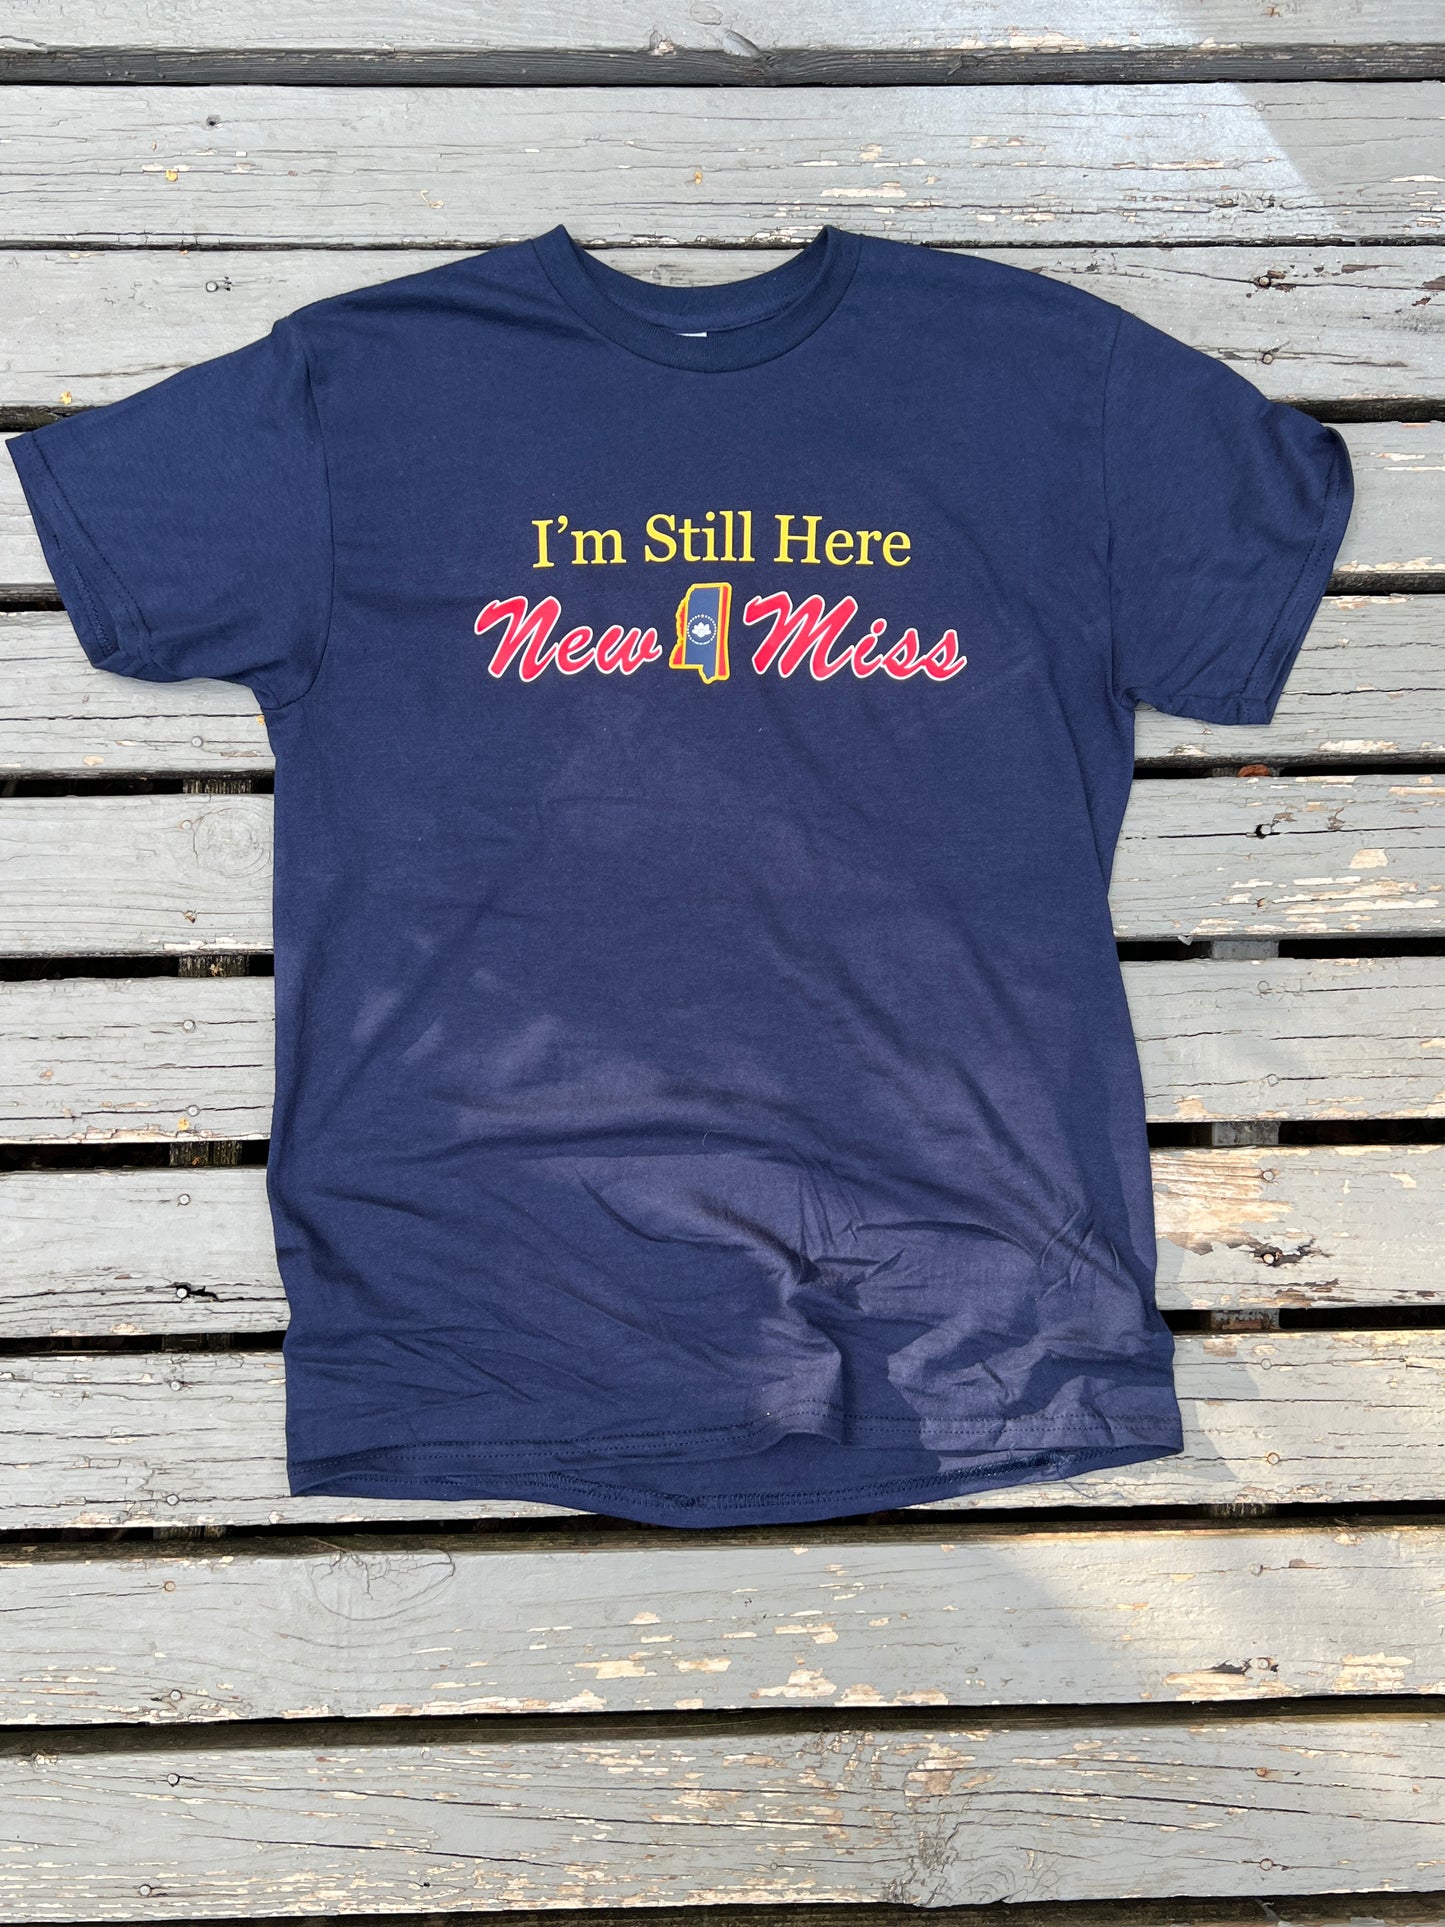 Limited Edition short sleeve Navy T-shirt  featuring " I'm Still Here"   with New Miss and State cutout.